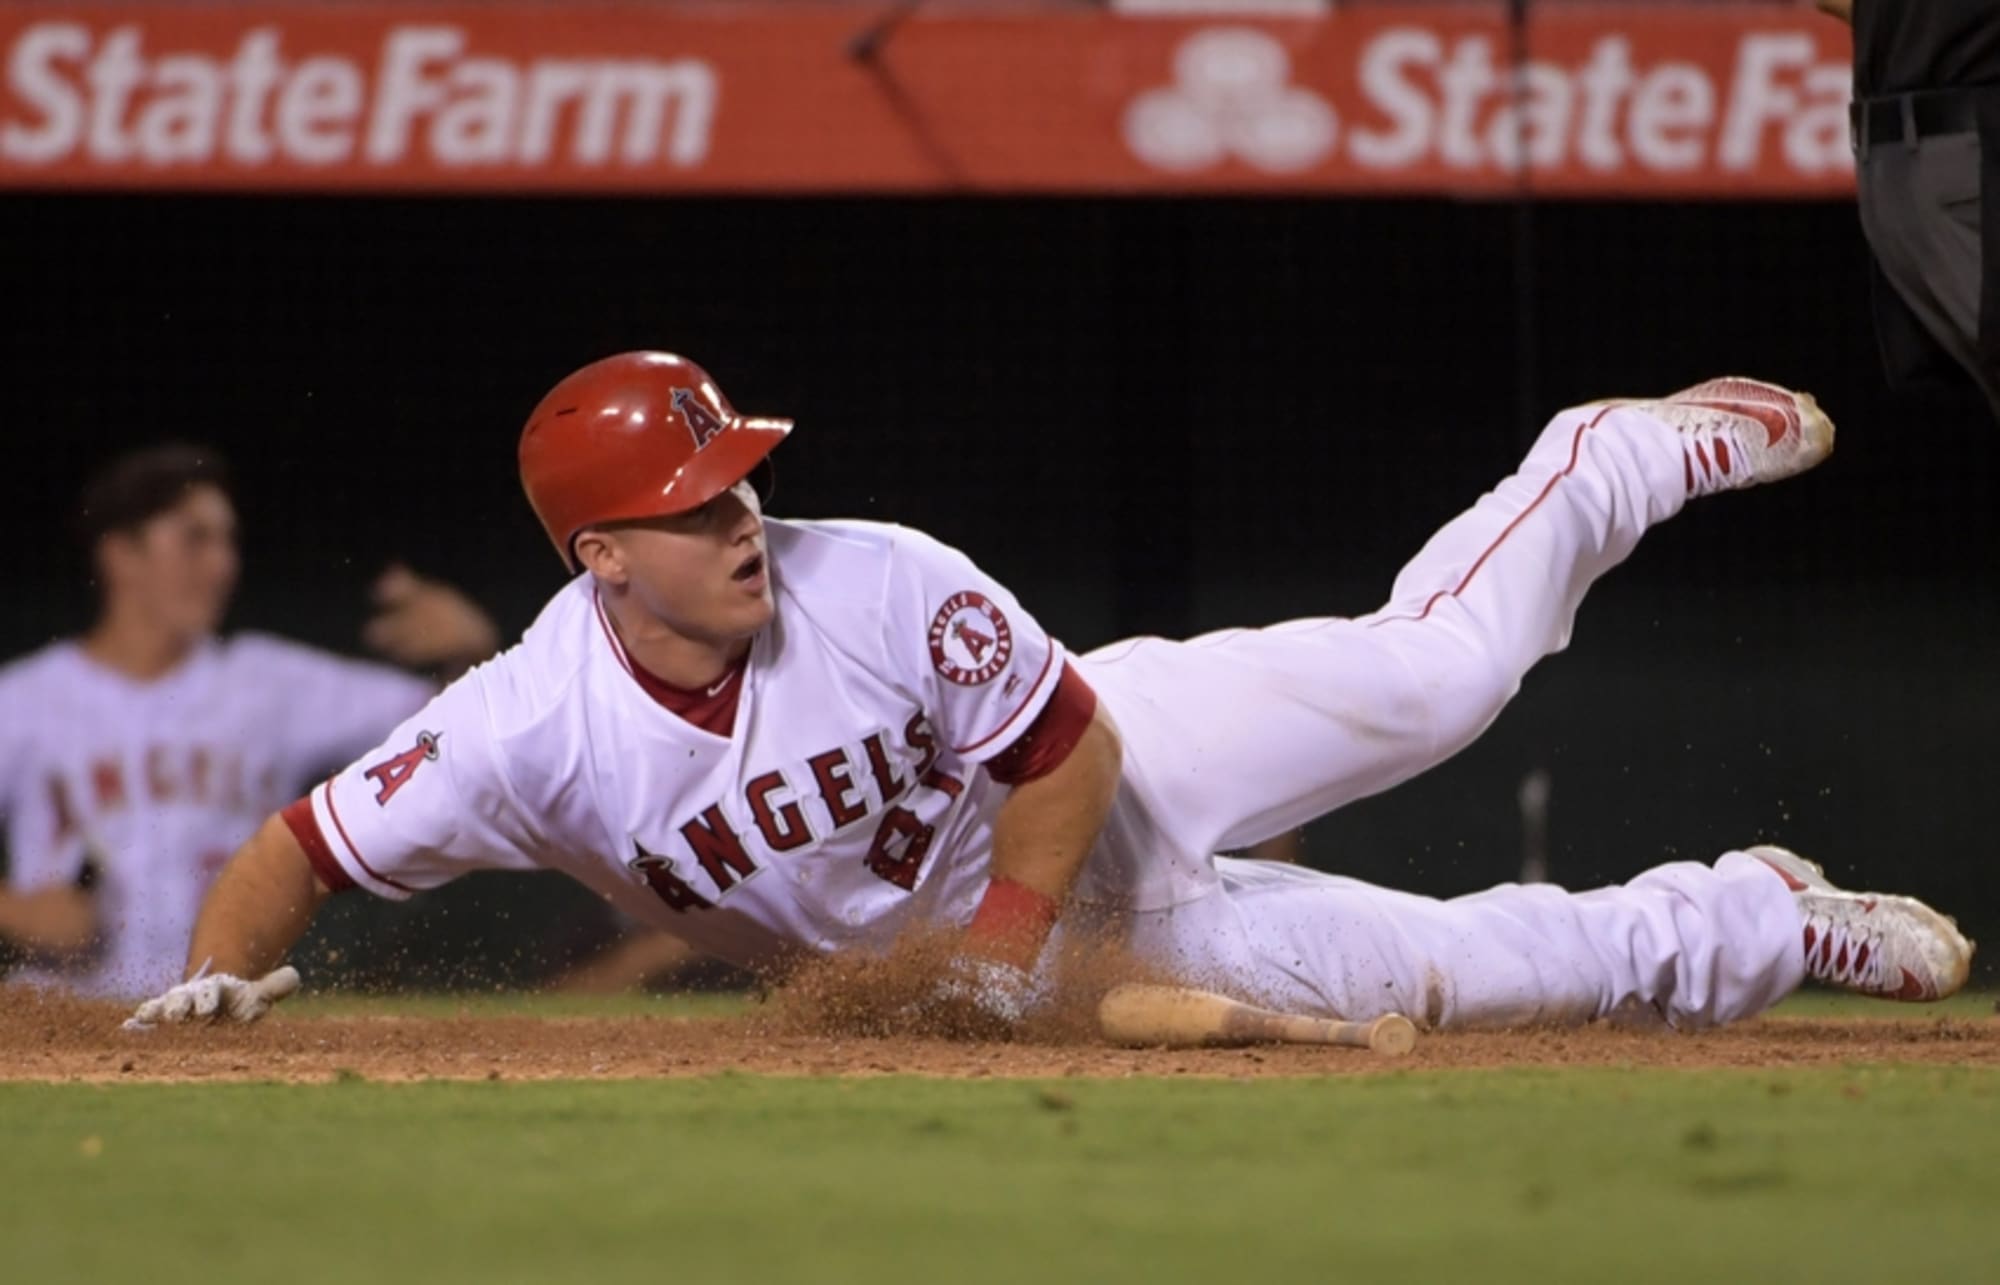 Angels' Mike Trout got off to a historic start as a rookie